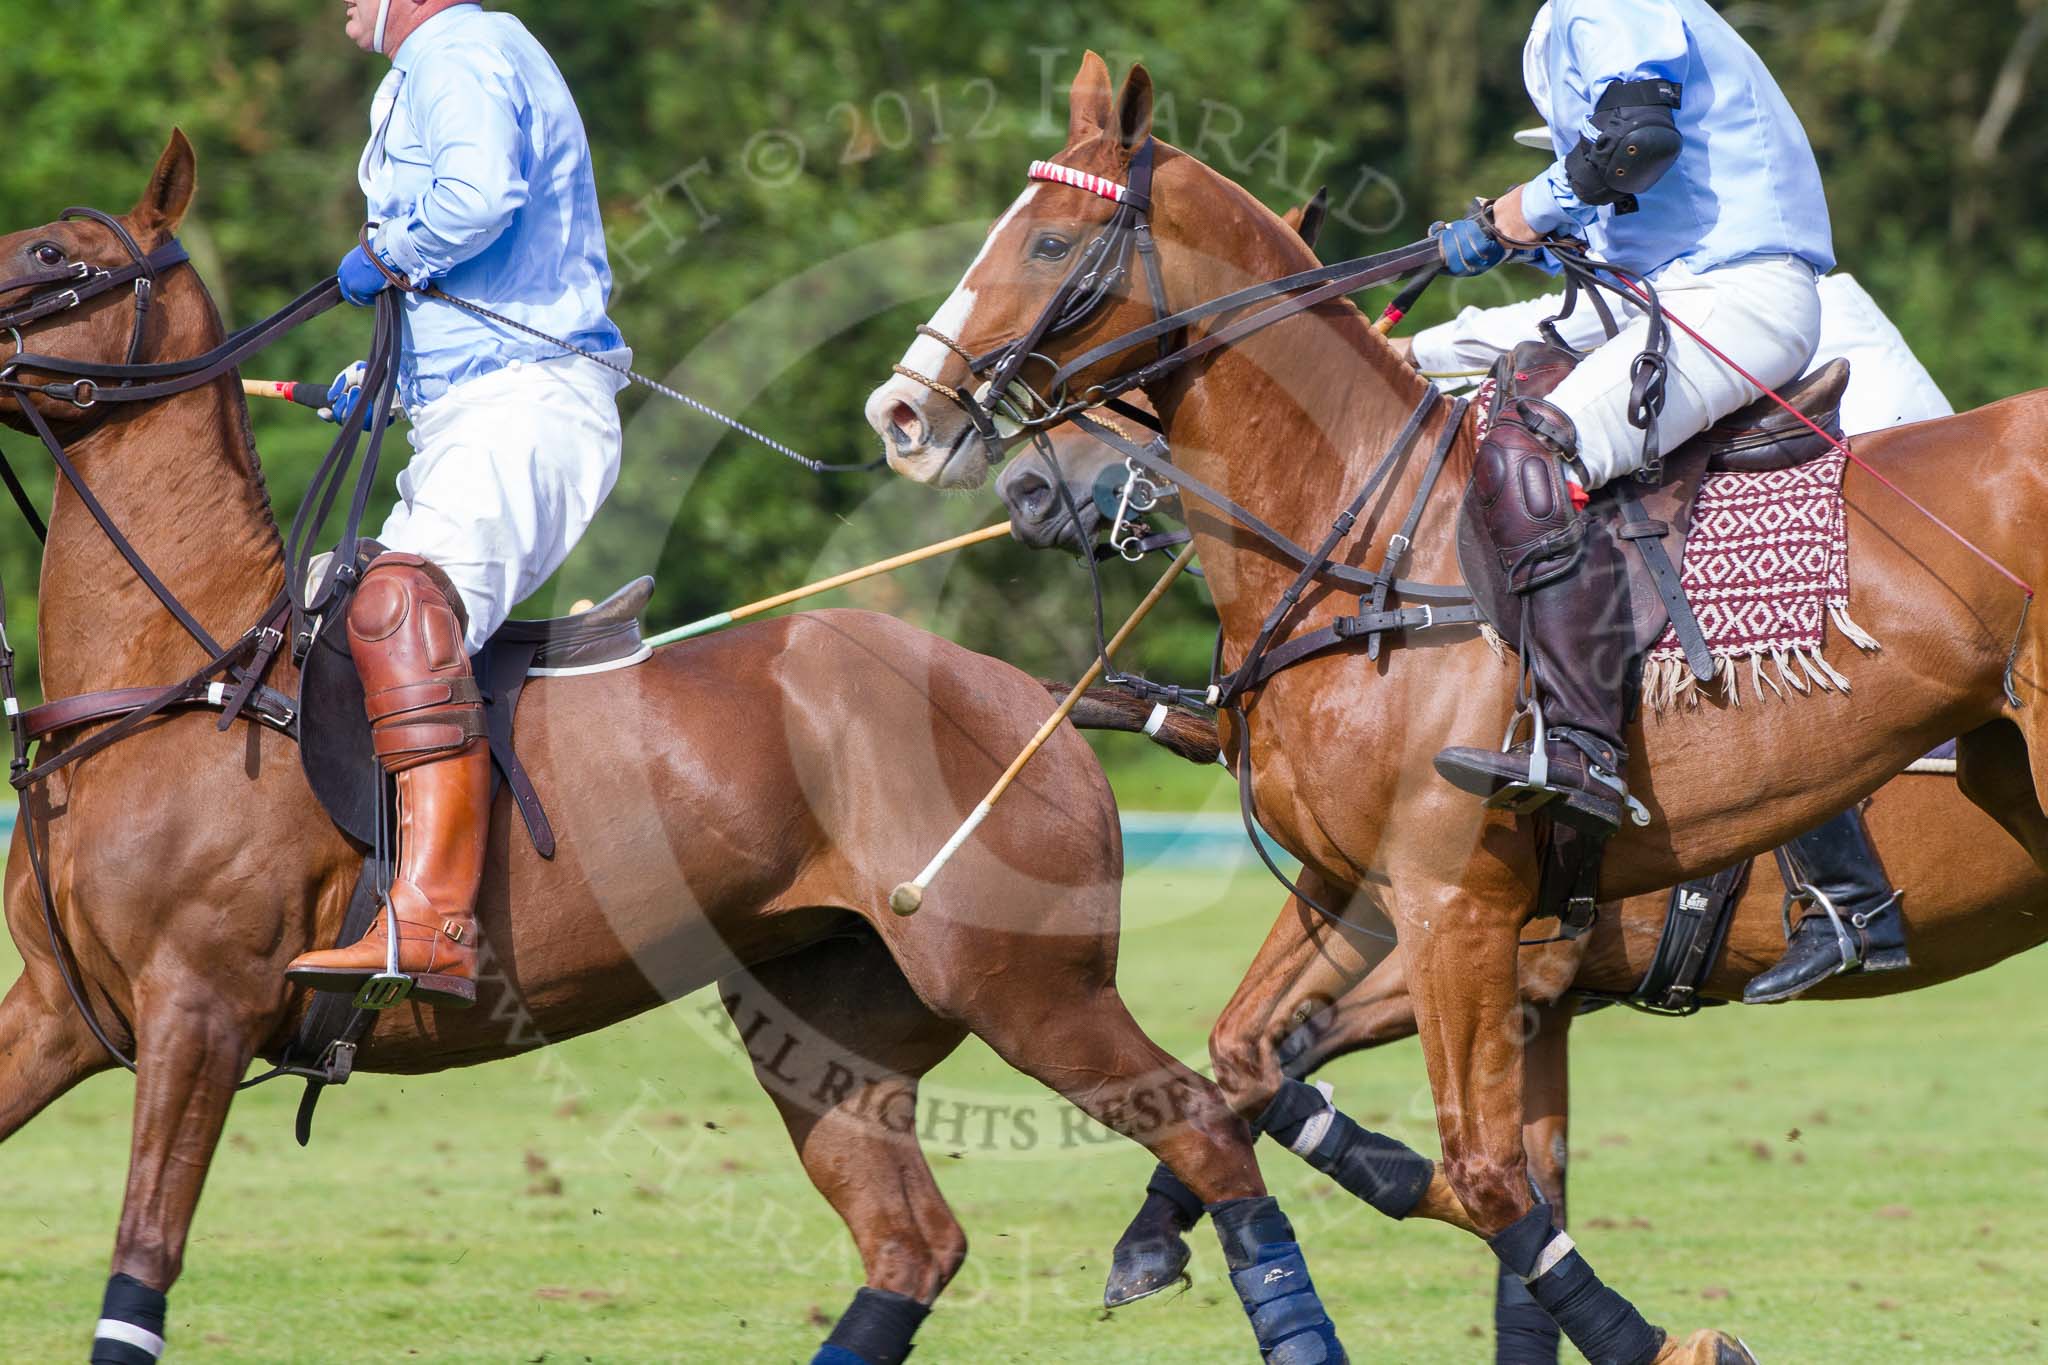 7th Heritage Polo Cup semi-finals: La Mariposa Argentina Polo Team..
Hurtwood Park Polo Club,
Ewhurst Green,
Surrey,
United Kingdom,
on 04 August 2012 at 16:49, image #327